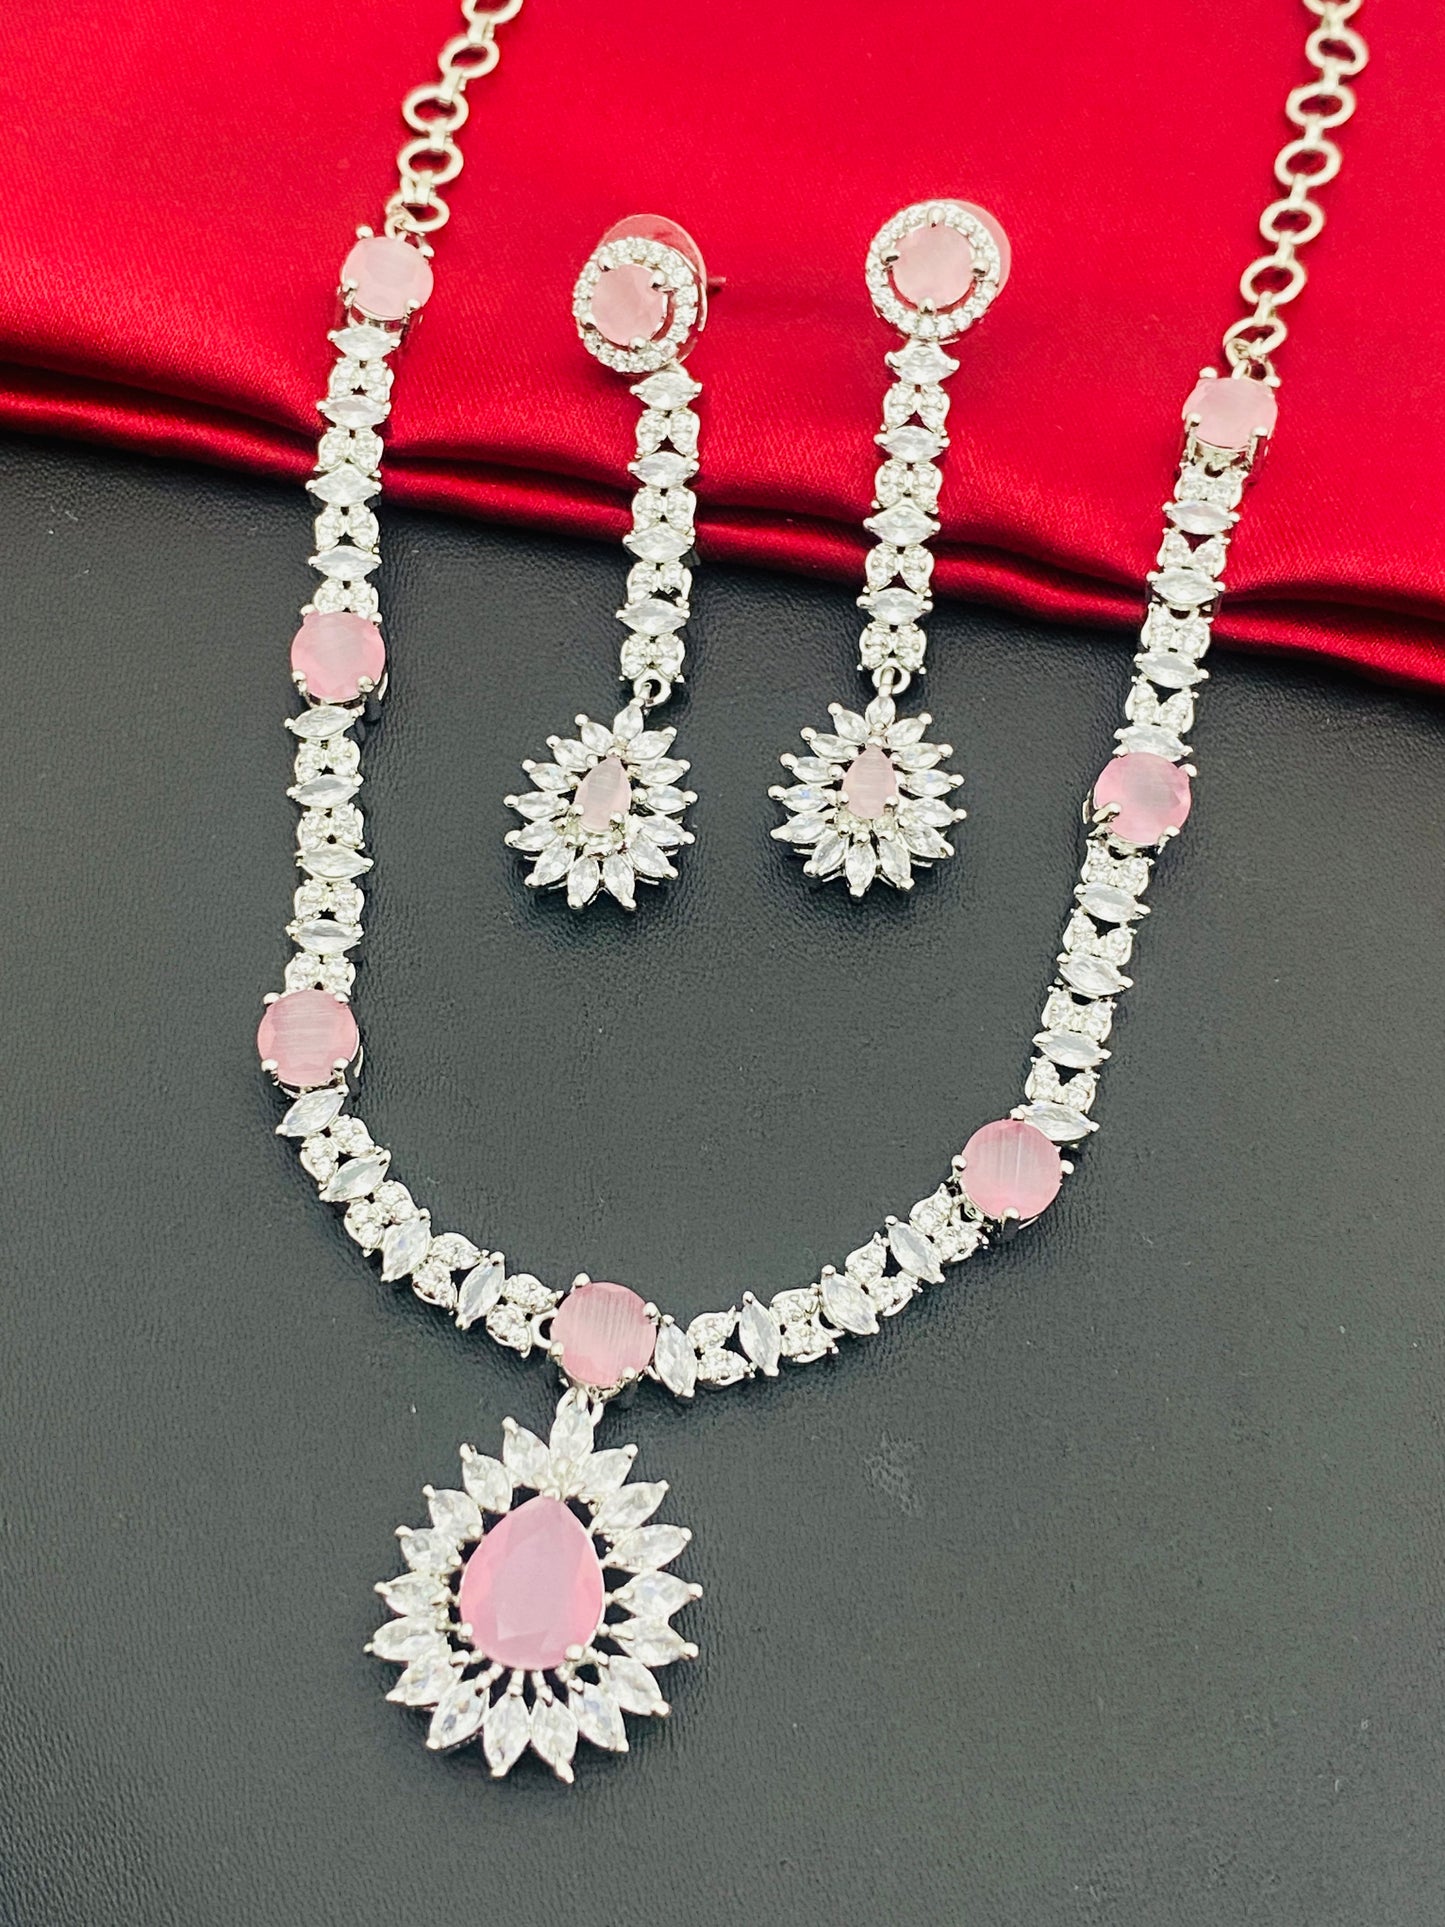 Appealing American Diamond Light Pink And White Stoned Necklace With Floral Designed Pendant